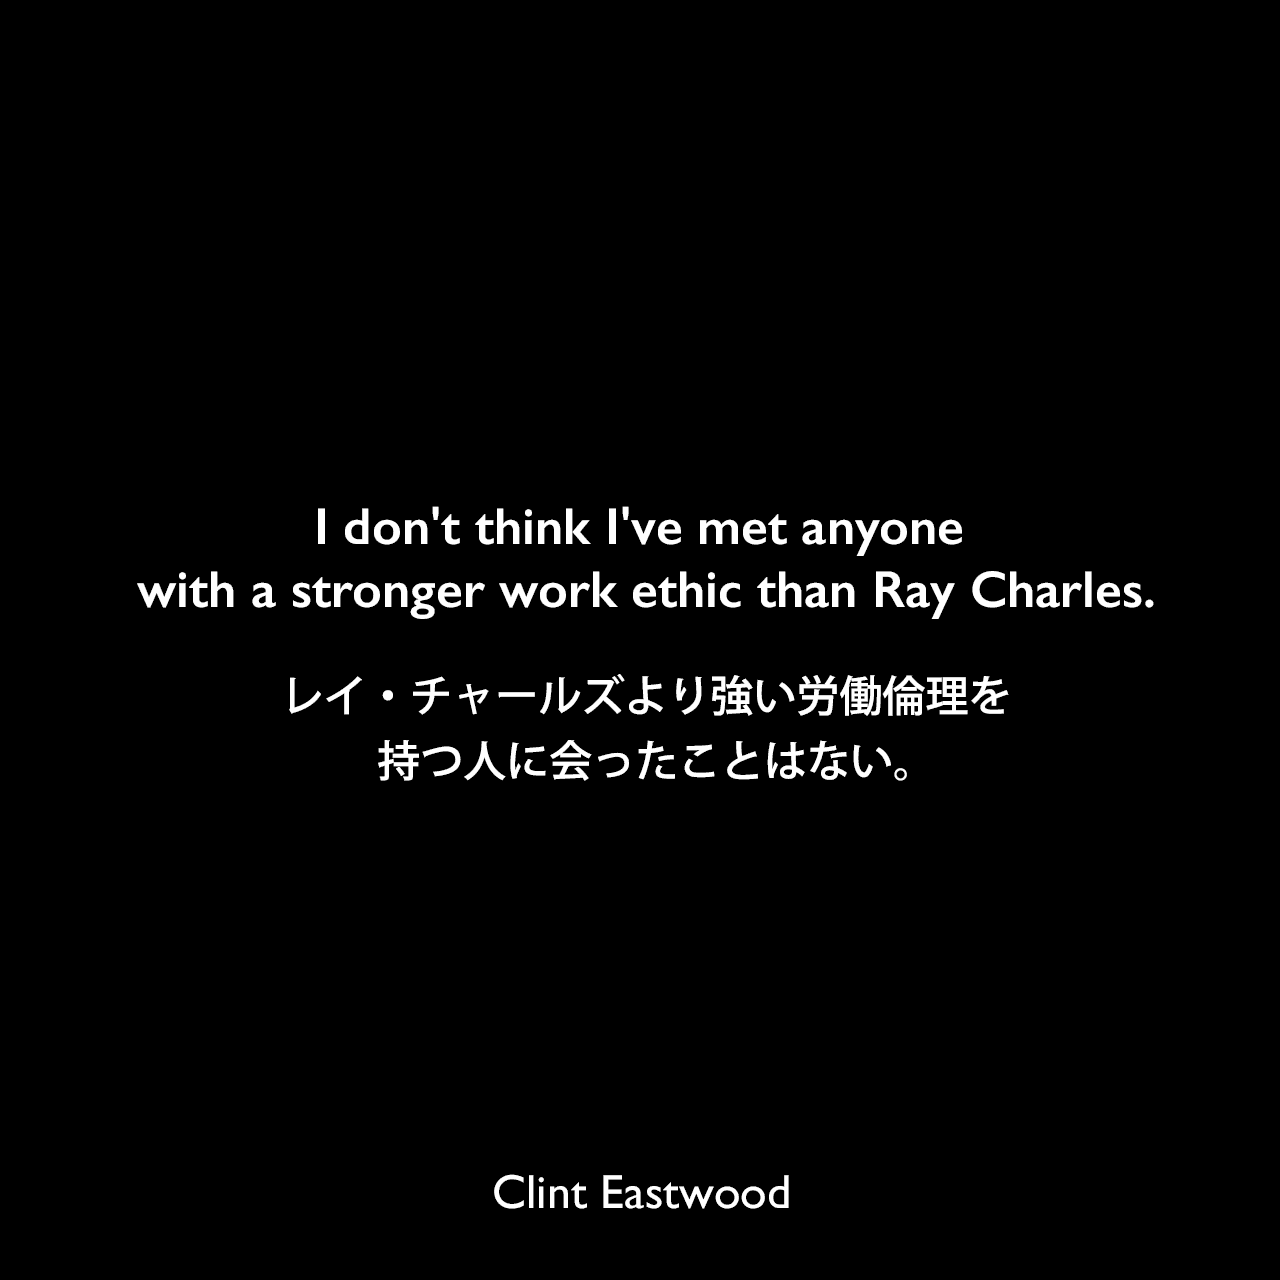 I don't think I've met anyone with a stronger work ethic than Ray Charles.レイ・チャールズより強い労働倫理を持つ人に会ったことはない。Clint Eastwood